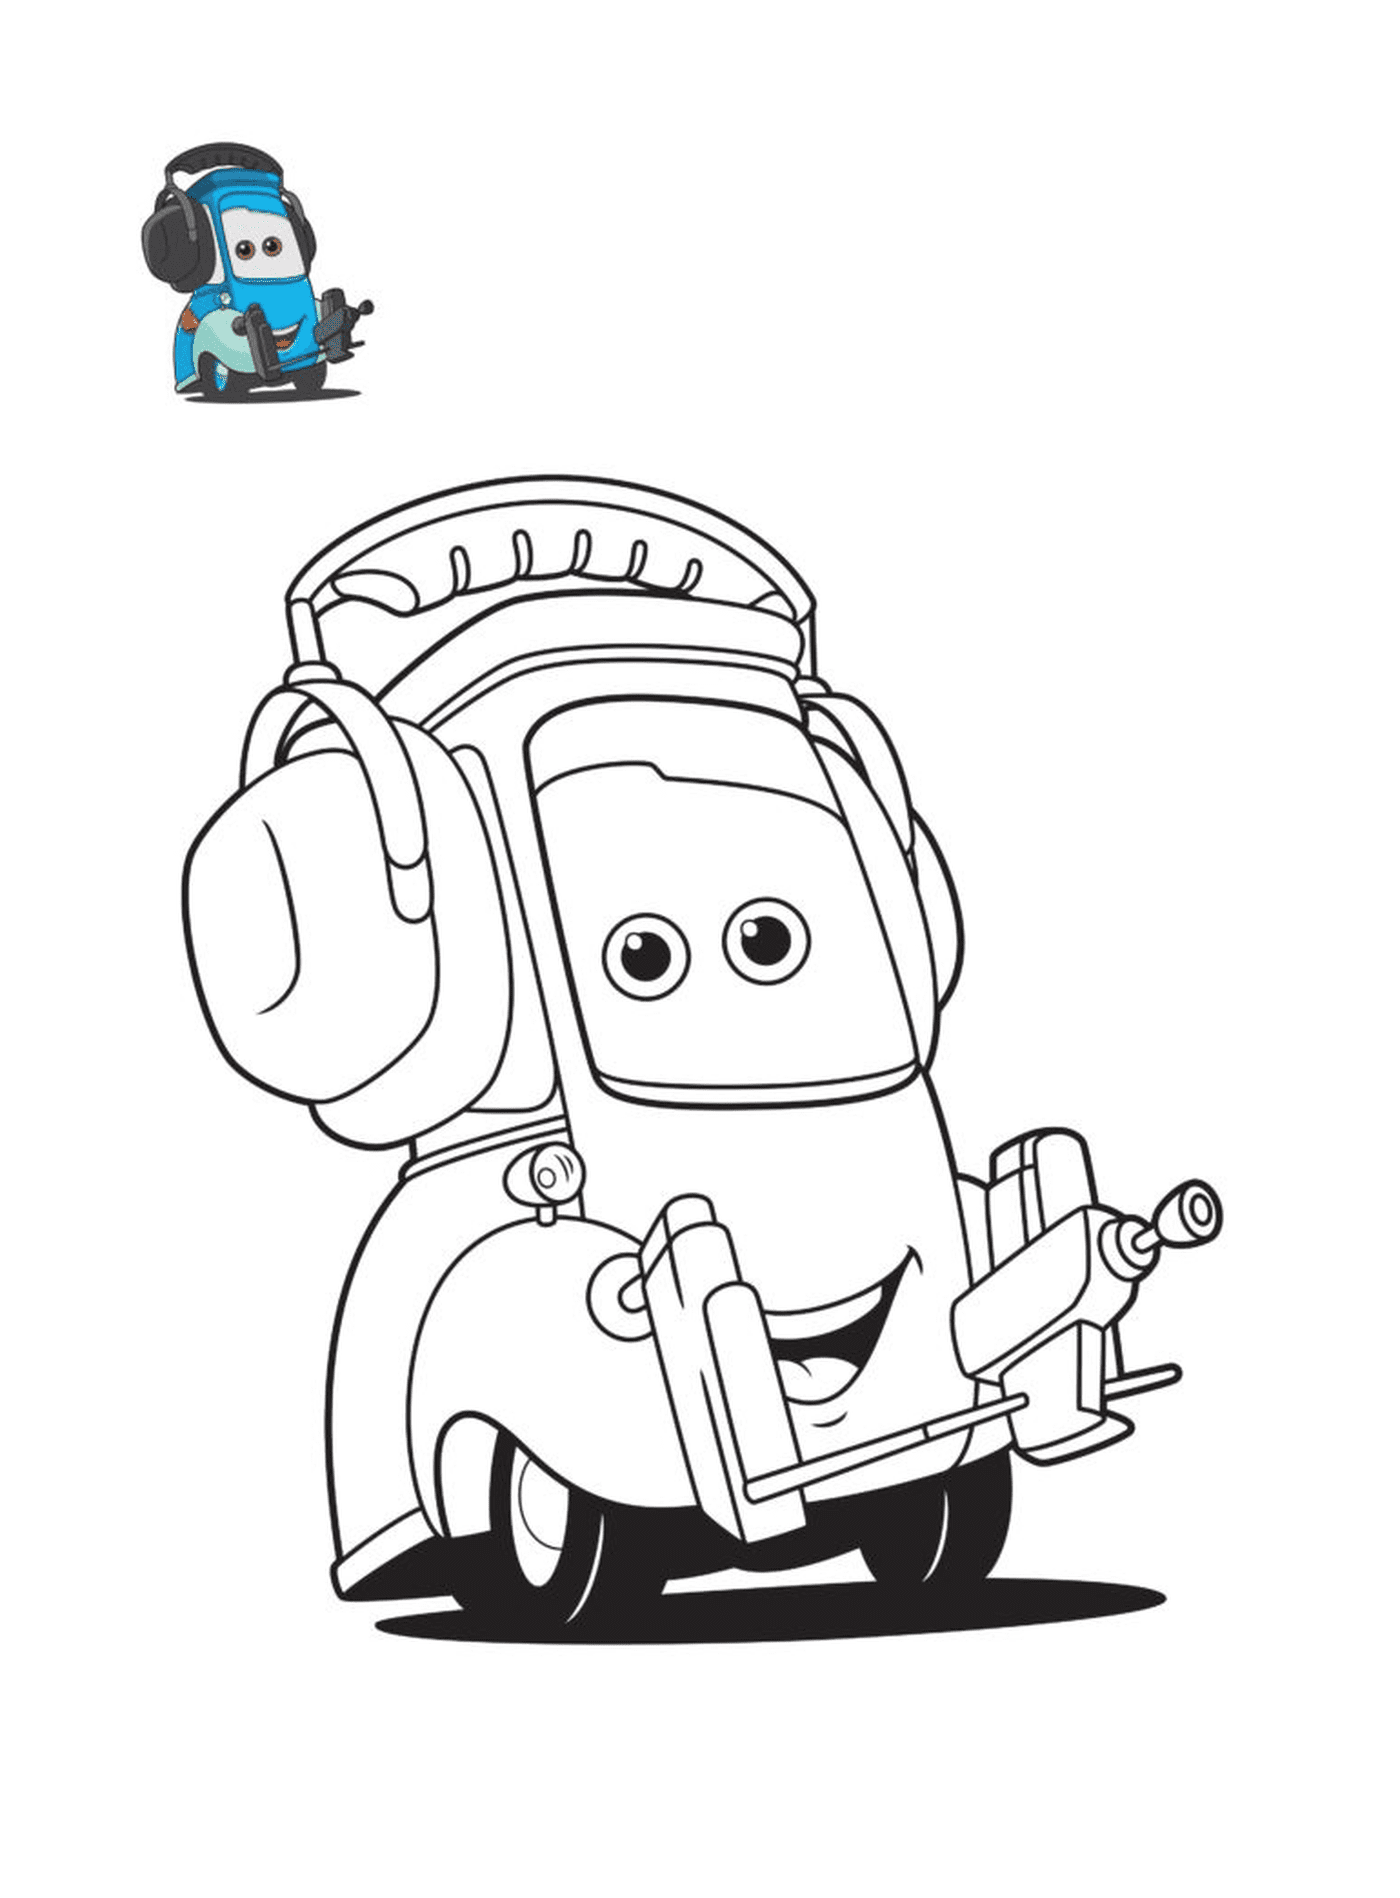  Cars 3, Guido, character of the movie Cars, a car with headphones 